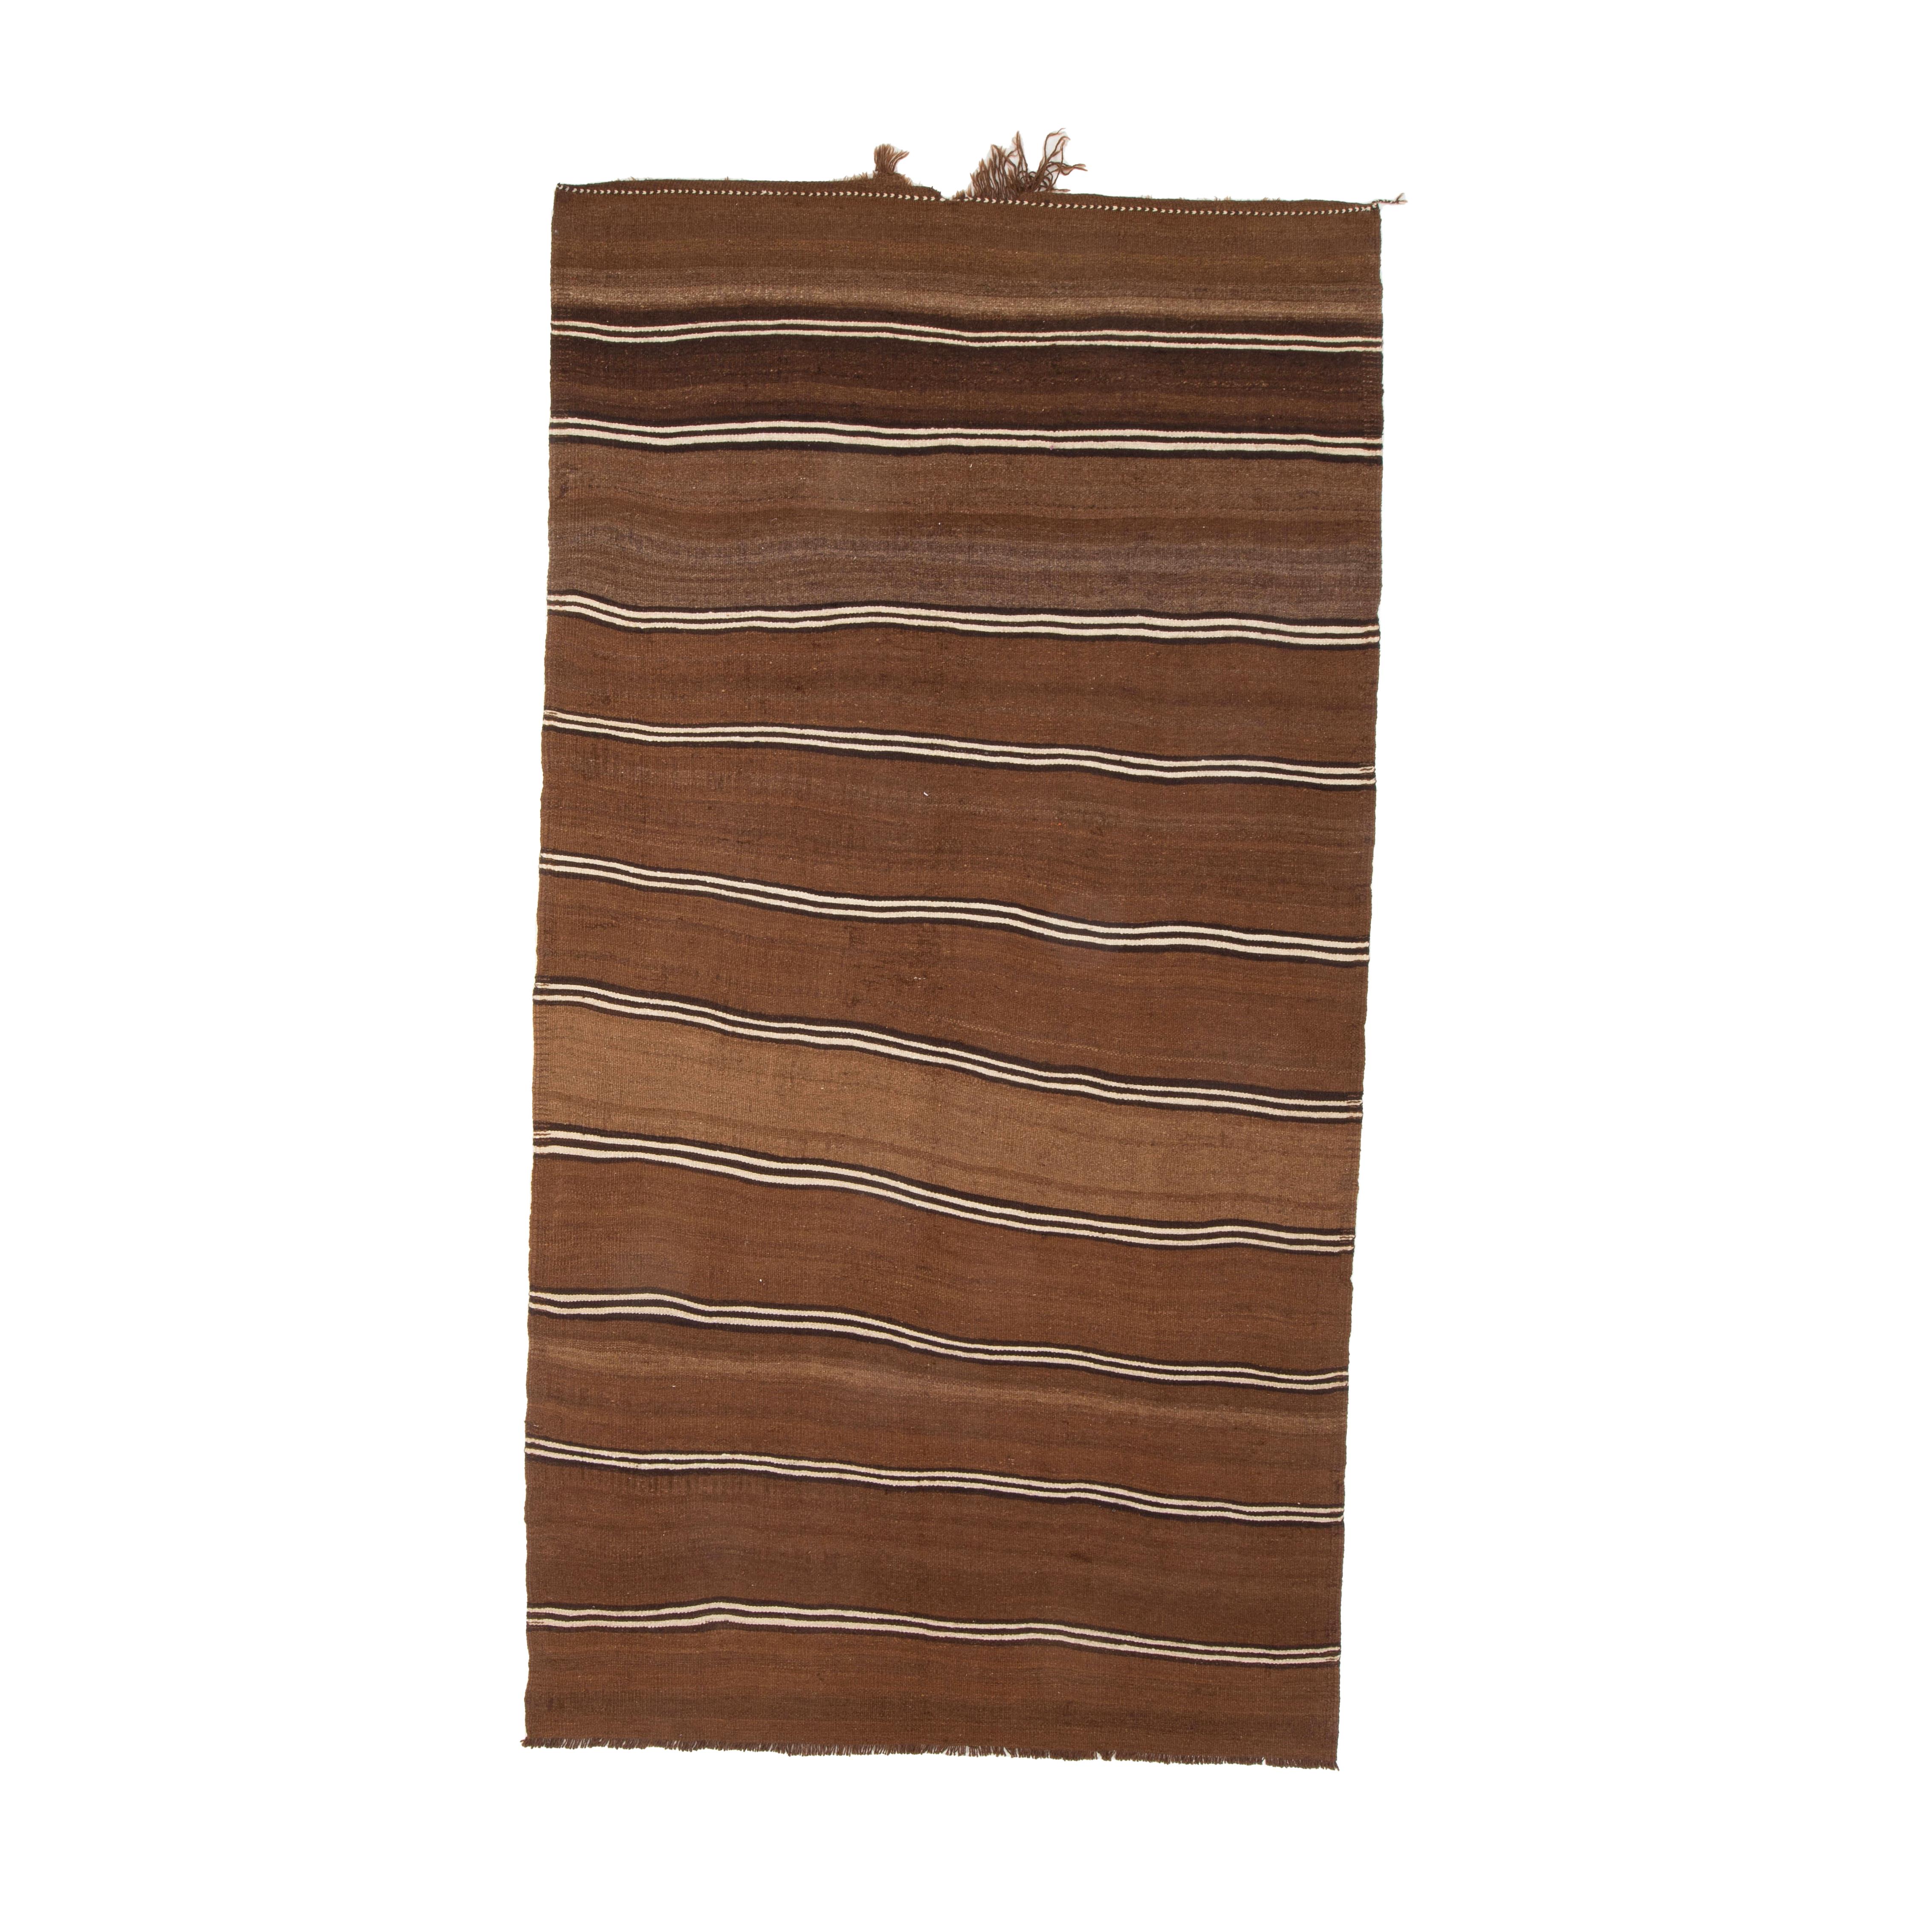 a solid, dtrong kilim woven with undyed wool from Eastern Turkey.